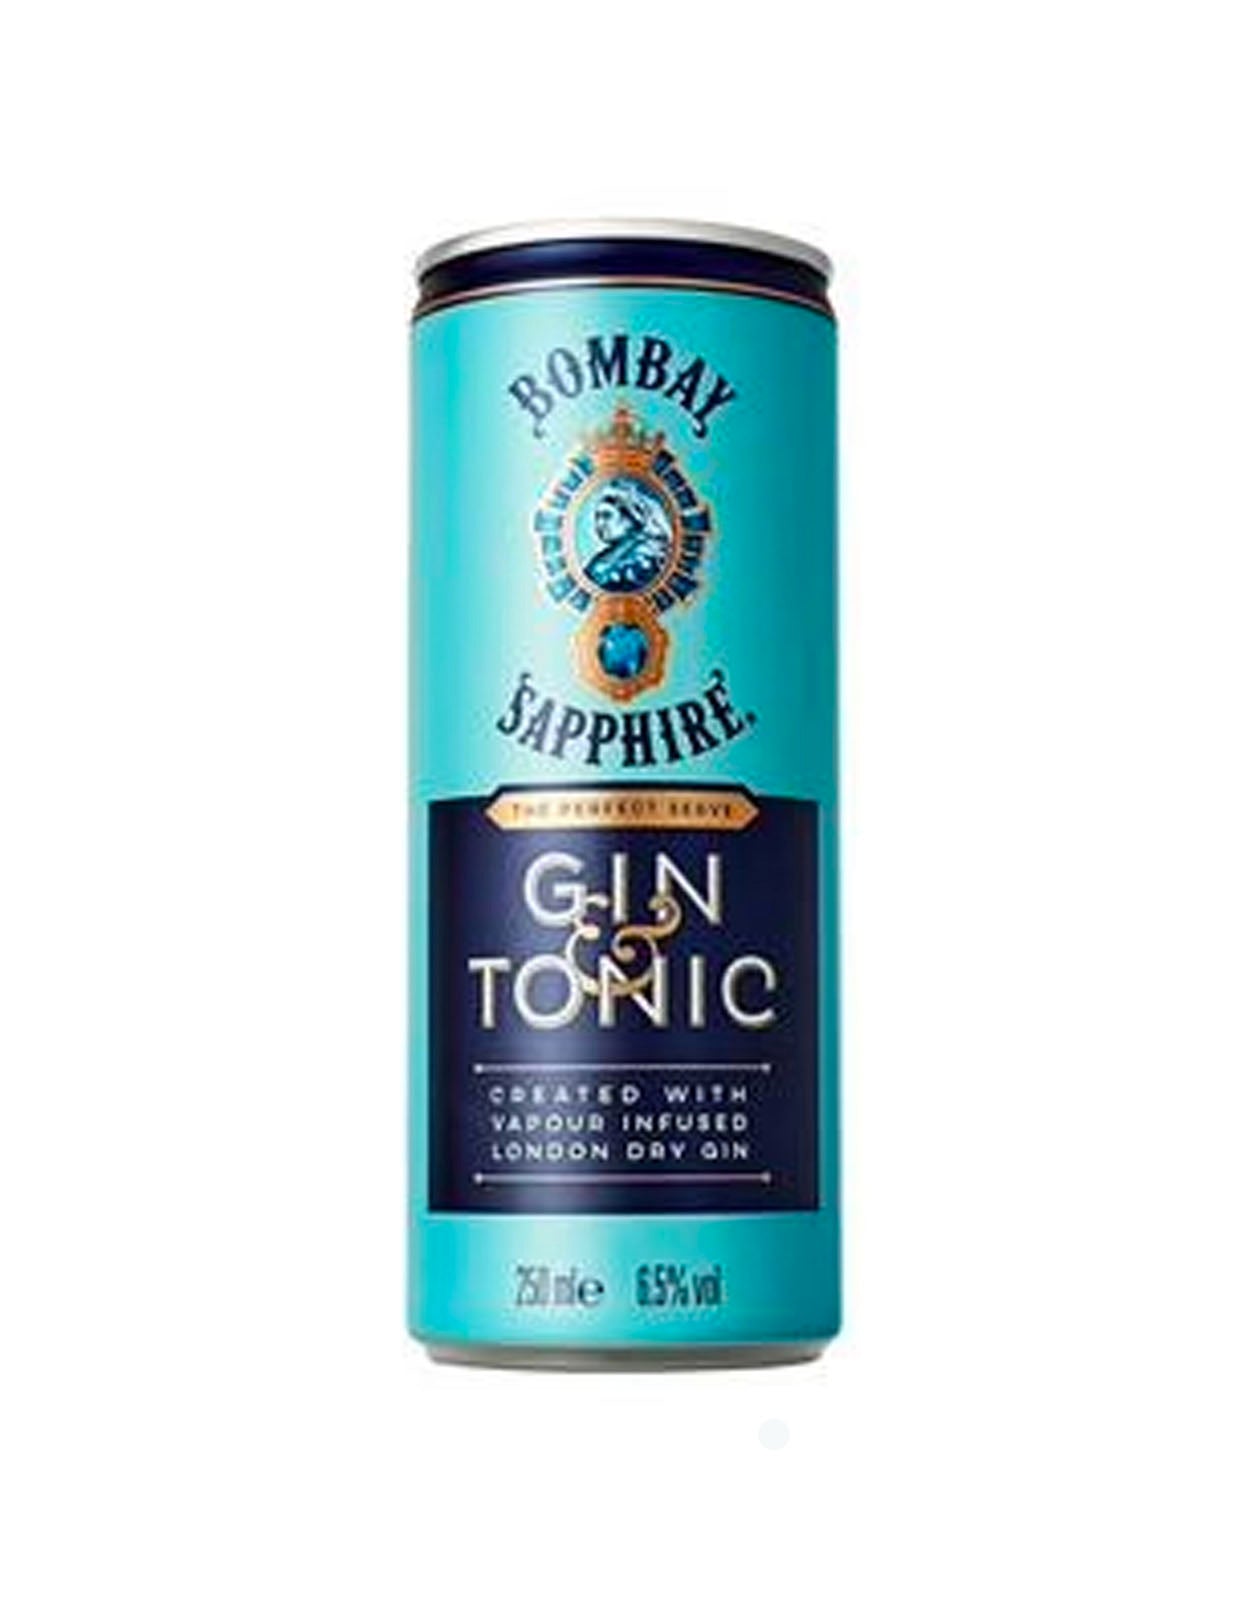 Bombay Sapphire Gin & Tonic 250 ml - 4 Cans